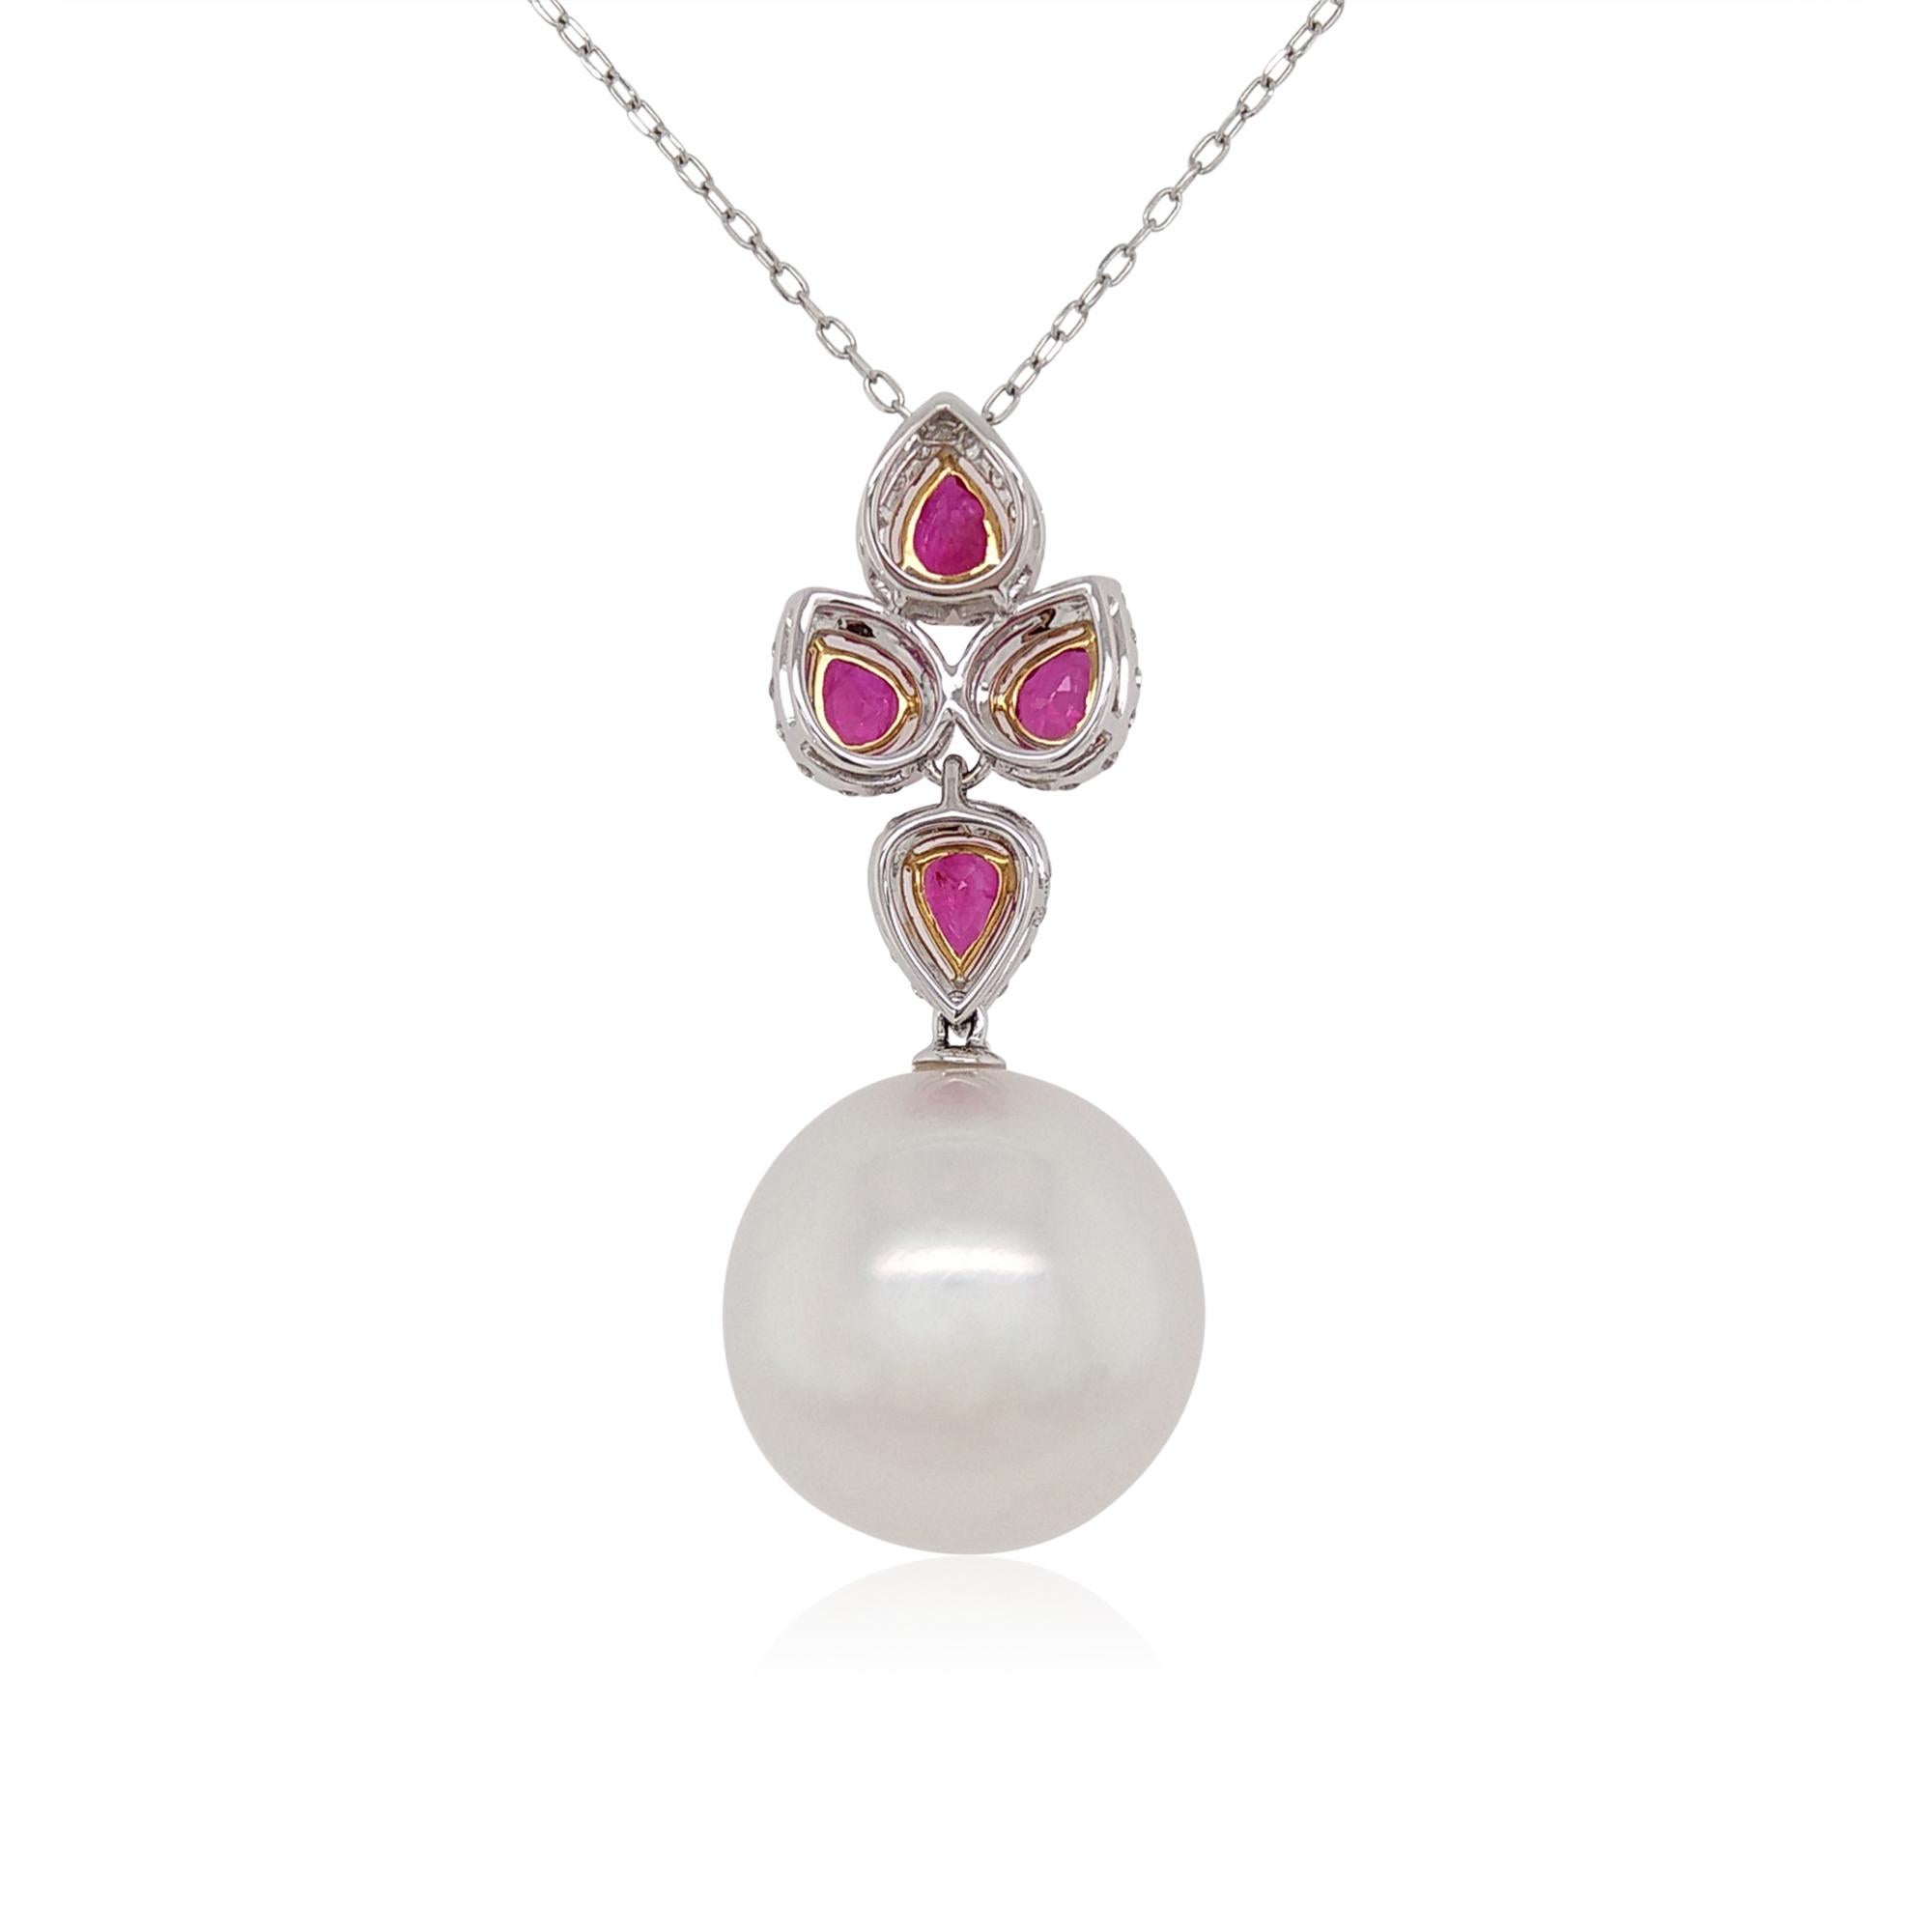 This unique pendant features a striking 16mm round White Pearl beneath a contemporary, Rubies and White Diamond-traced twist. The perfect piece to take you from day to night, this pendant will elevate any outfit - especially when paired with